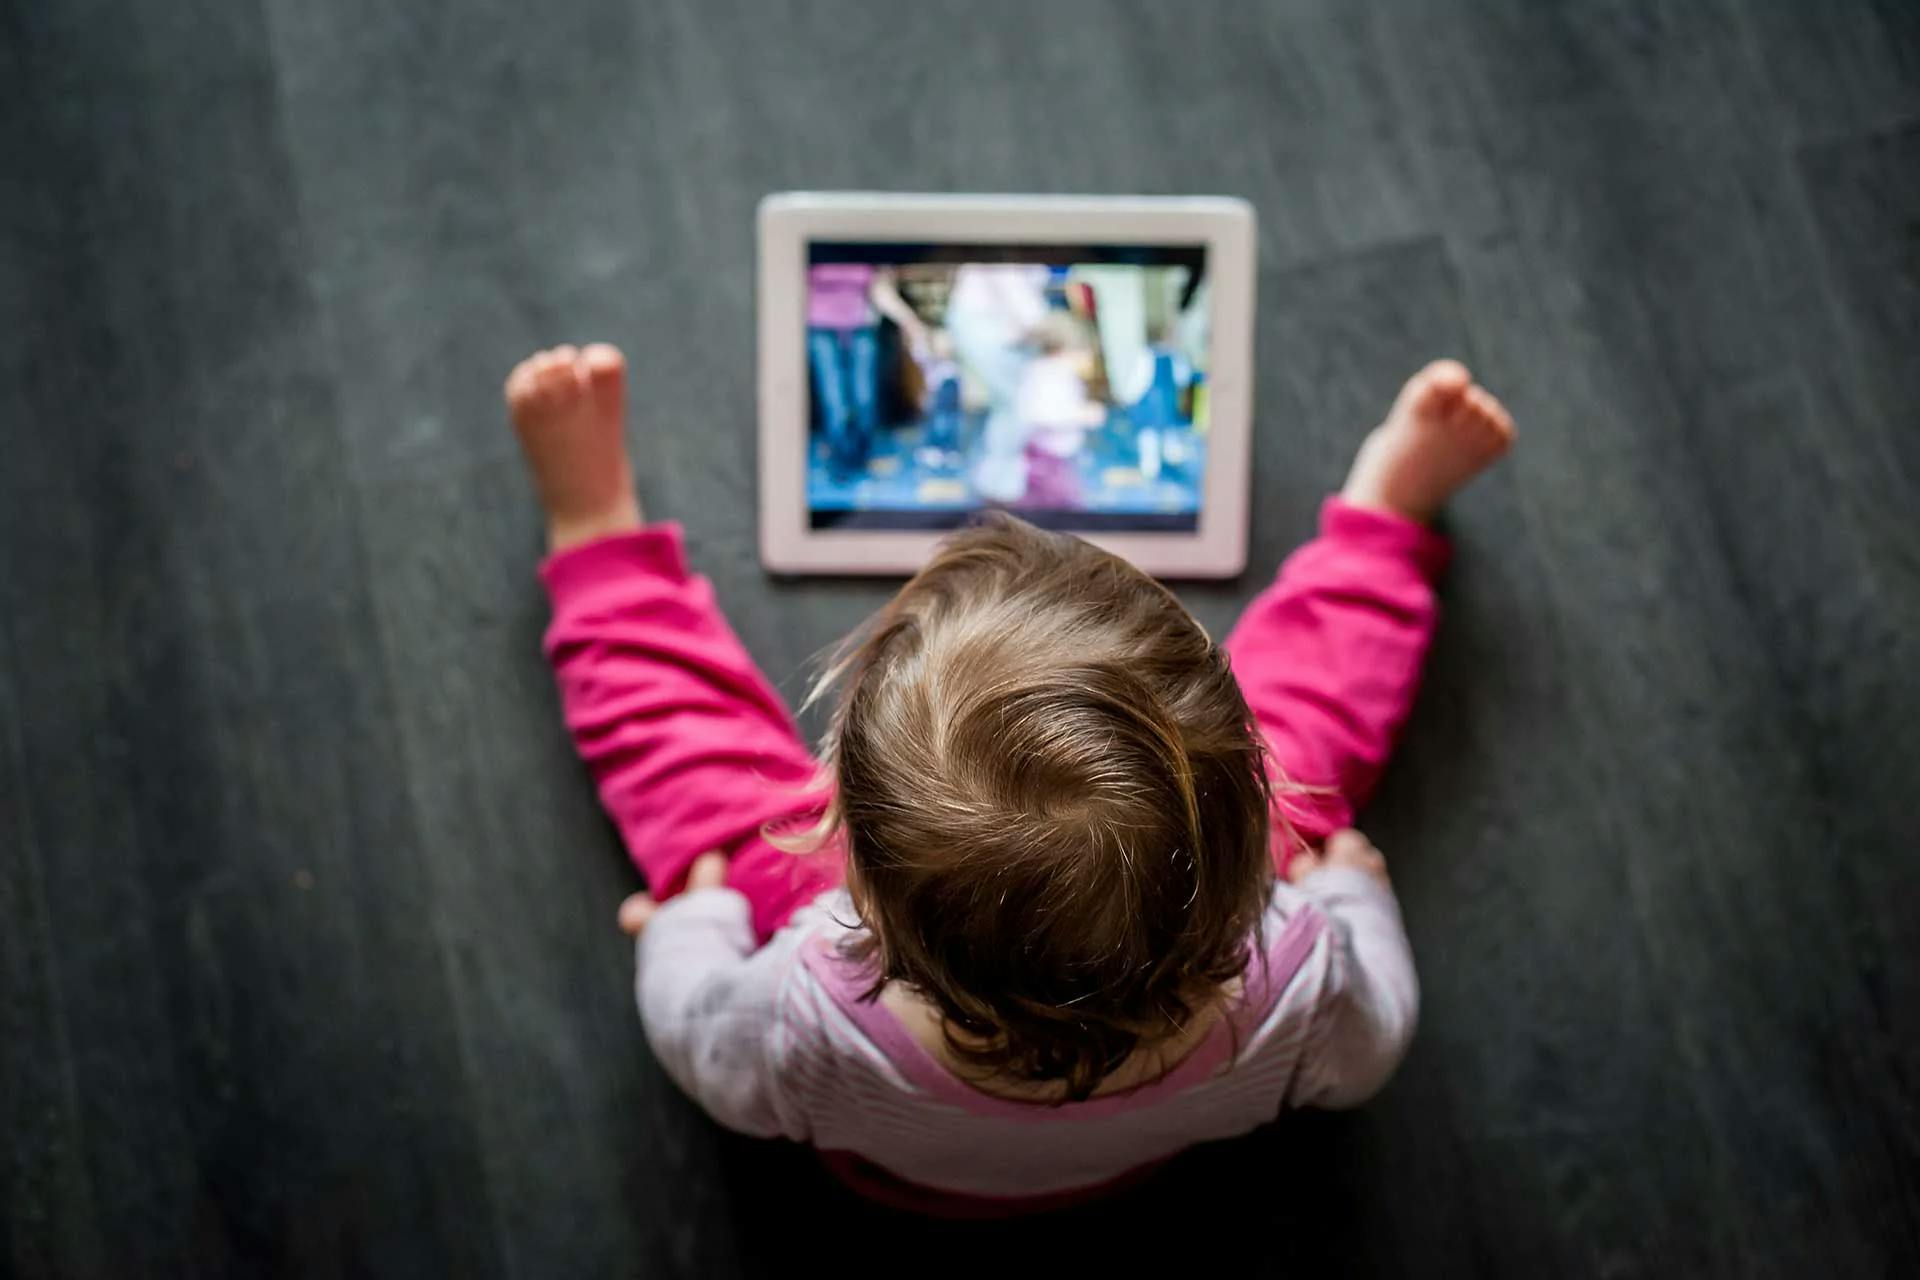 This blog post is a guide for parents on how to engage their child without relying on screen time. It covers topics such as the effects of excessive screen time on children, alternative indoor activities for all ages, and tips for creating a stimulating environment for play and learning. By following the advice in this post, parents can foster their child's creativity, imagination, and cognitive development while building a stronger bond with them.